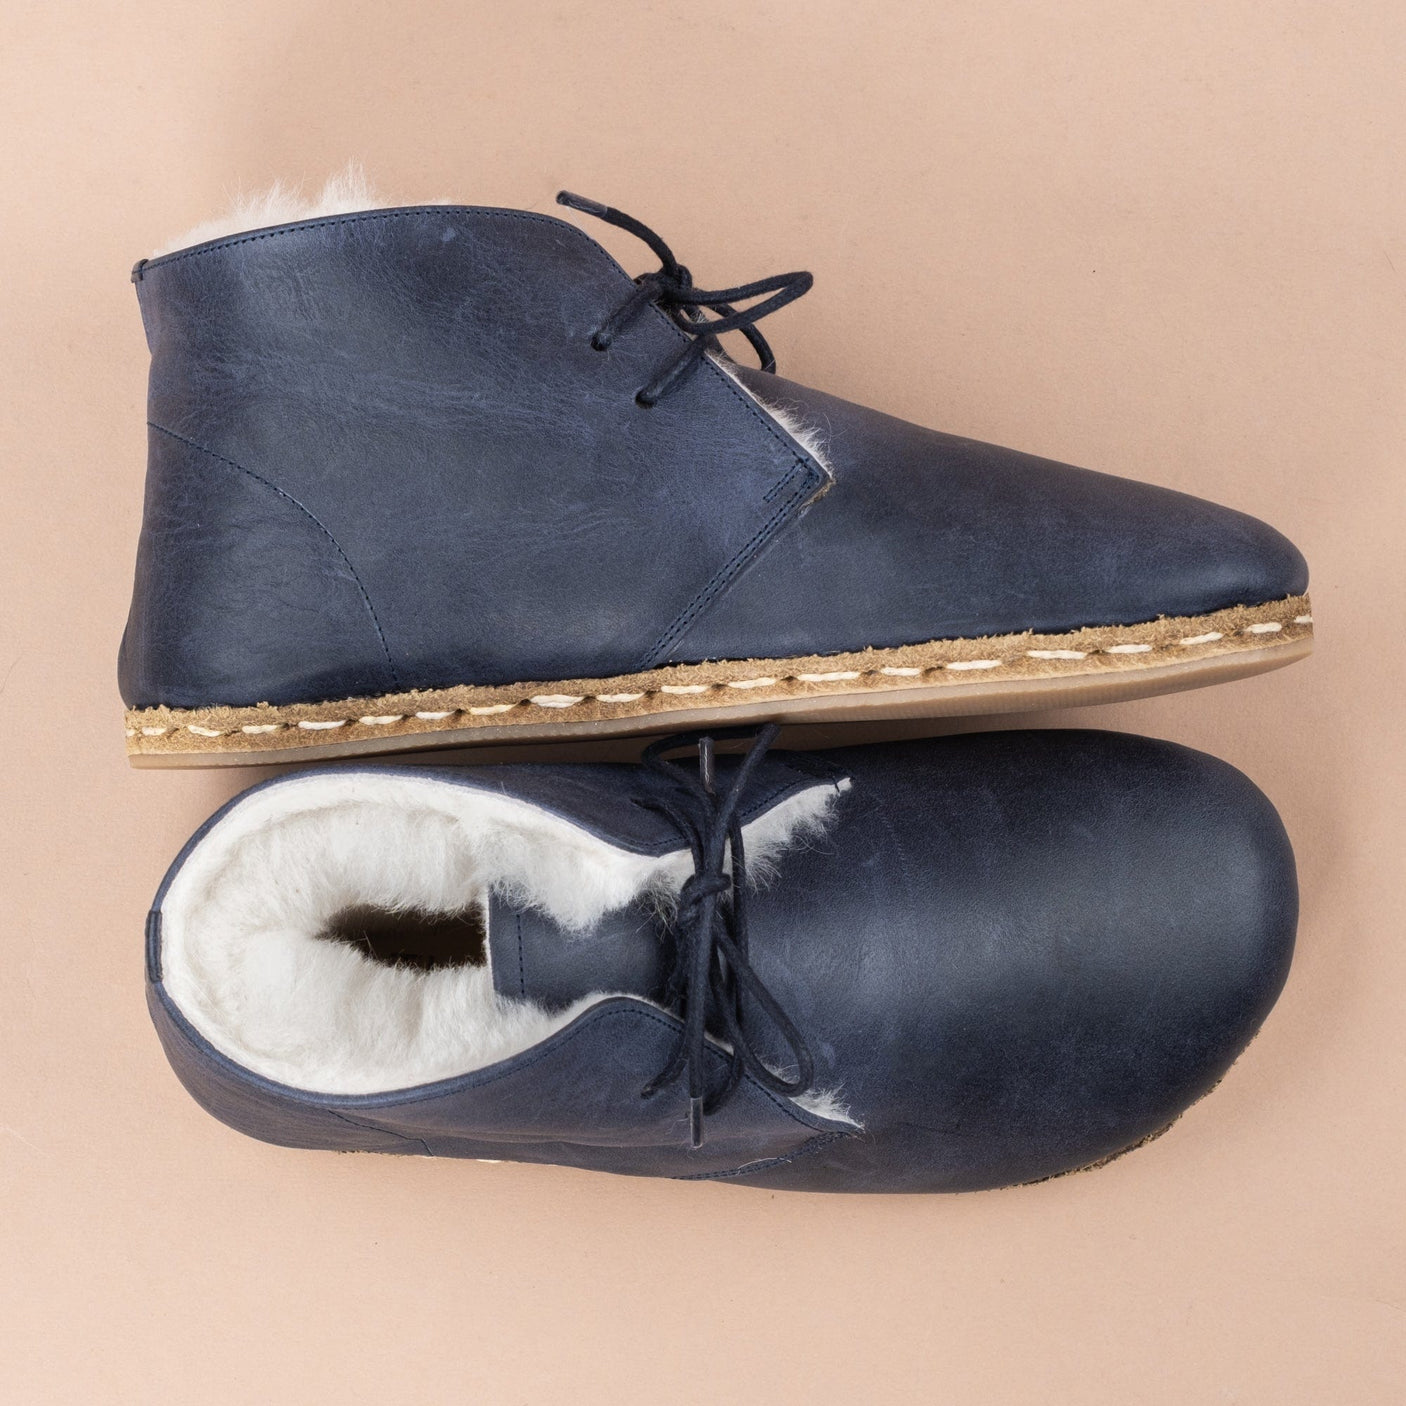 Women's Blue Barefoot Oxford Boots with Fur